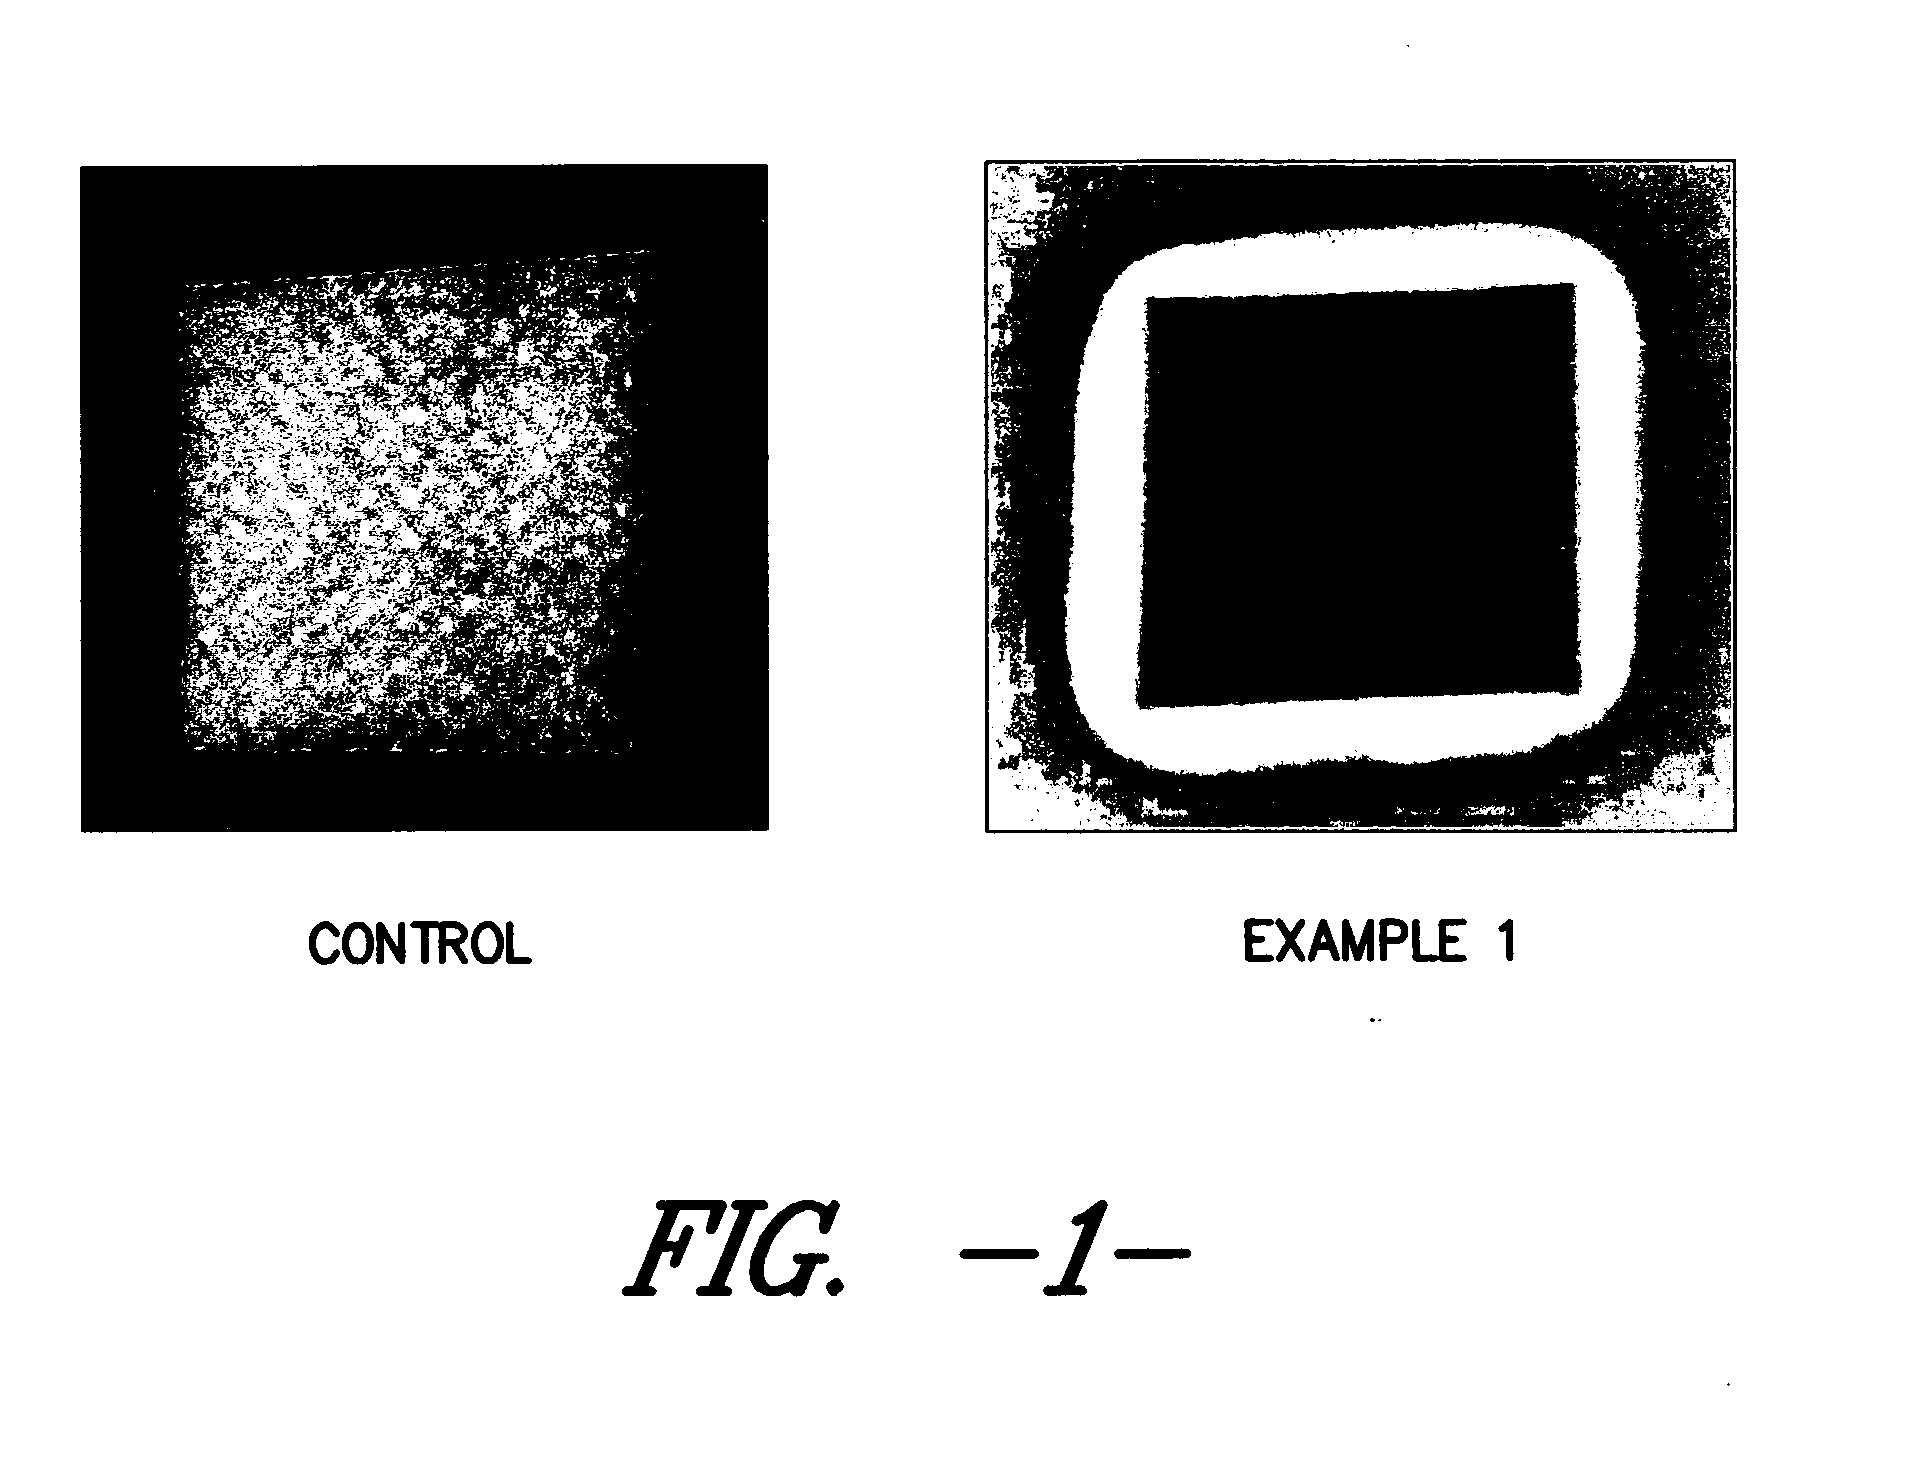 Silver-containing wound care device